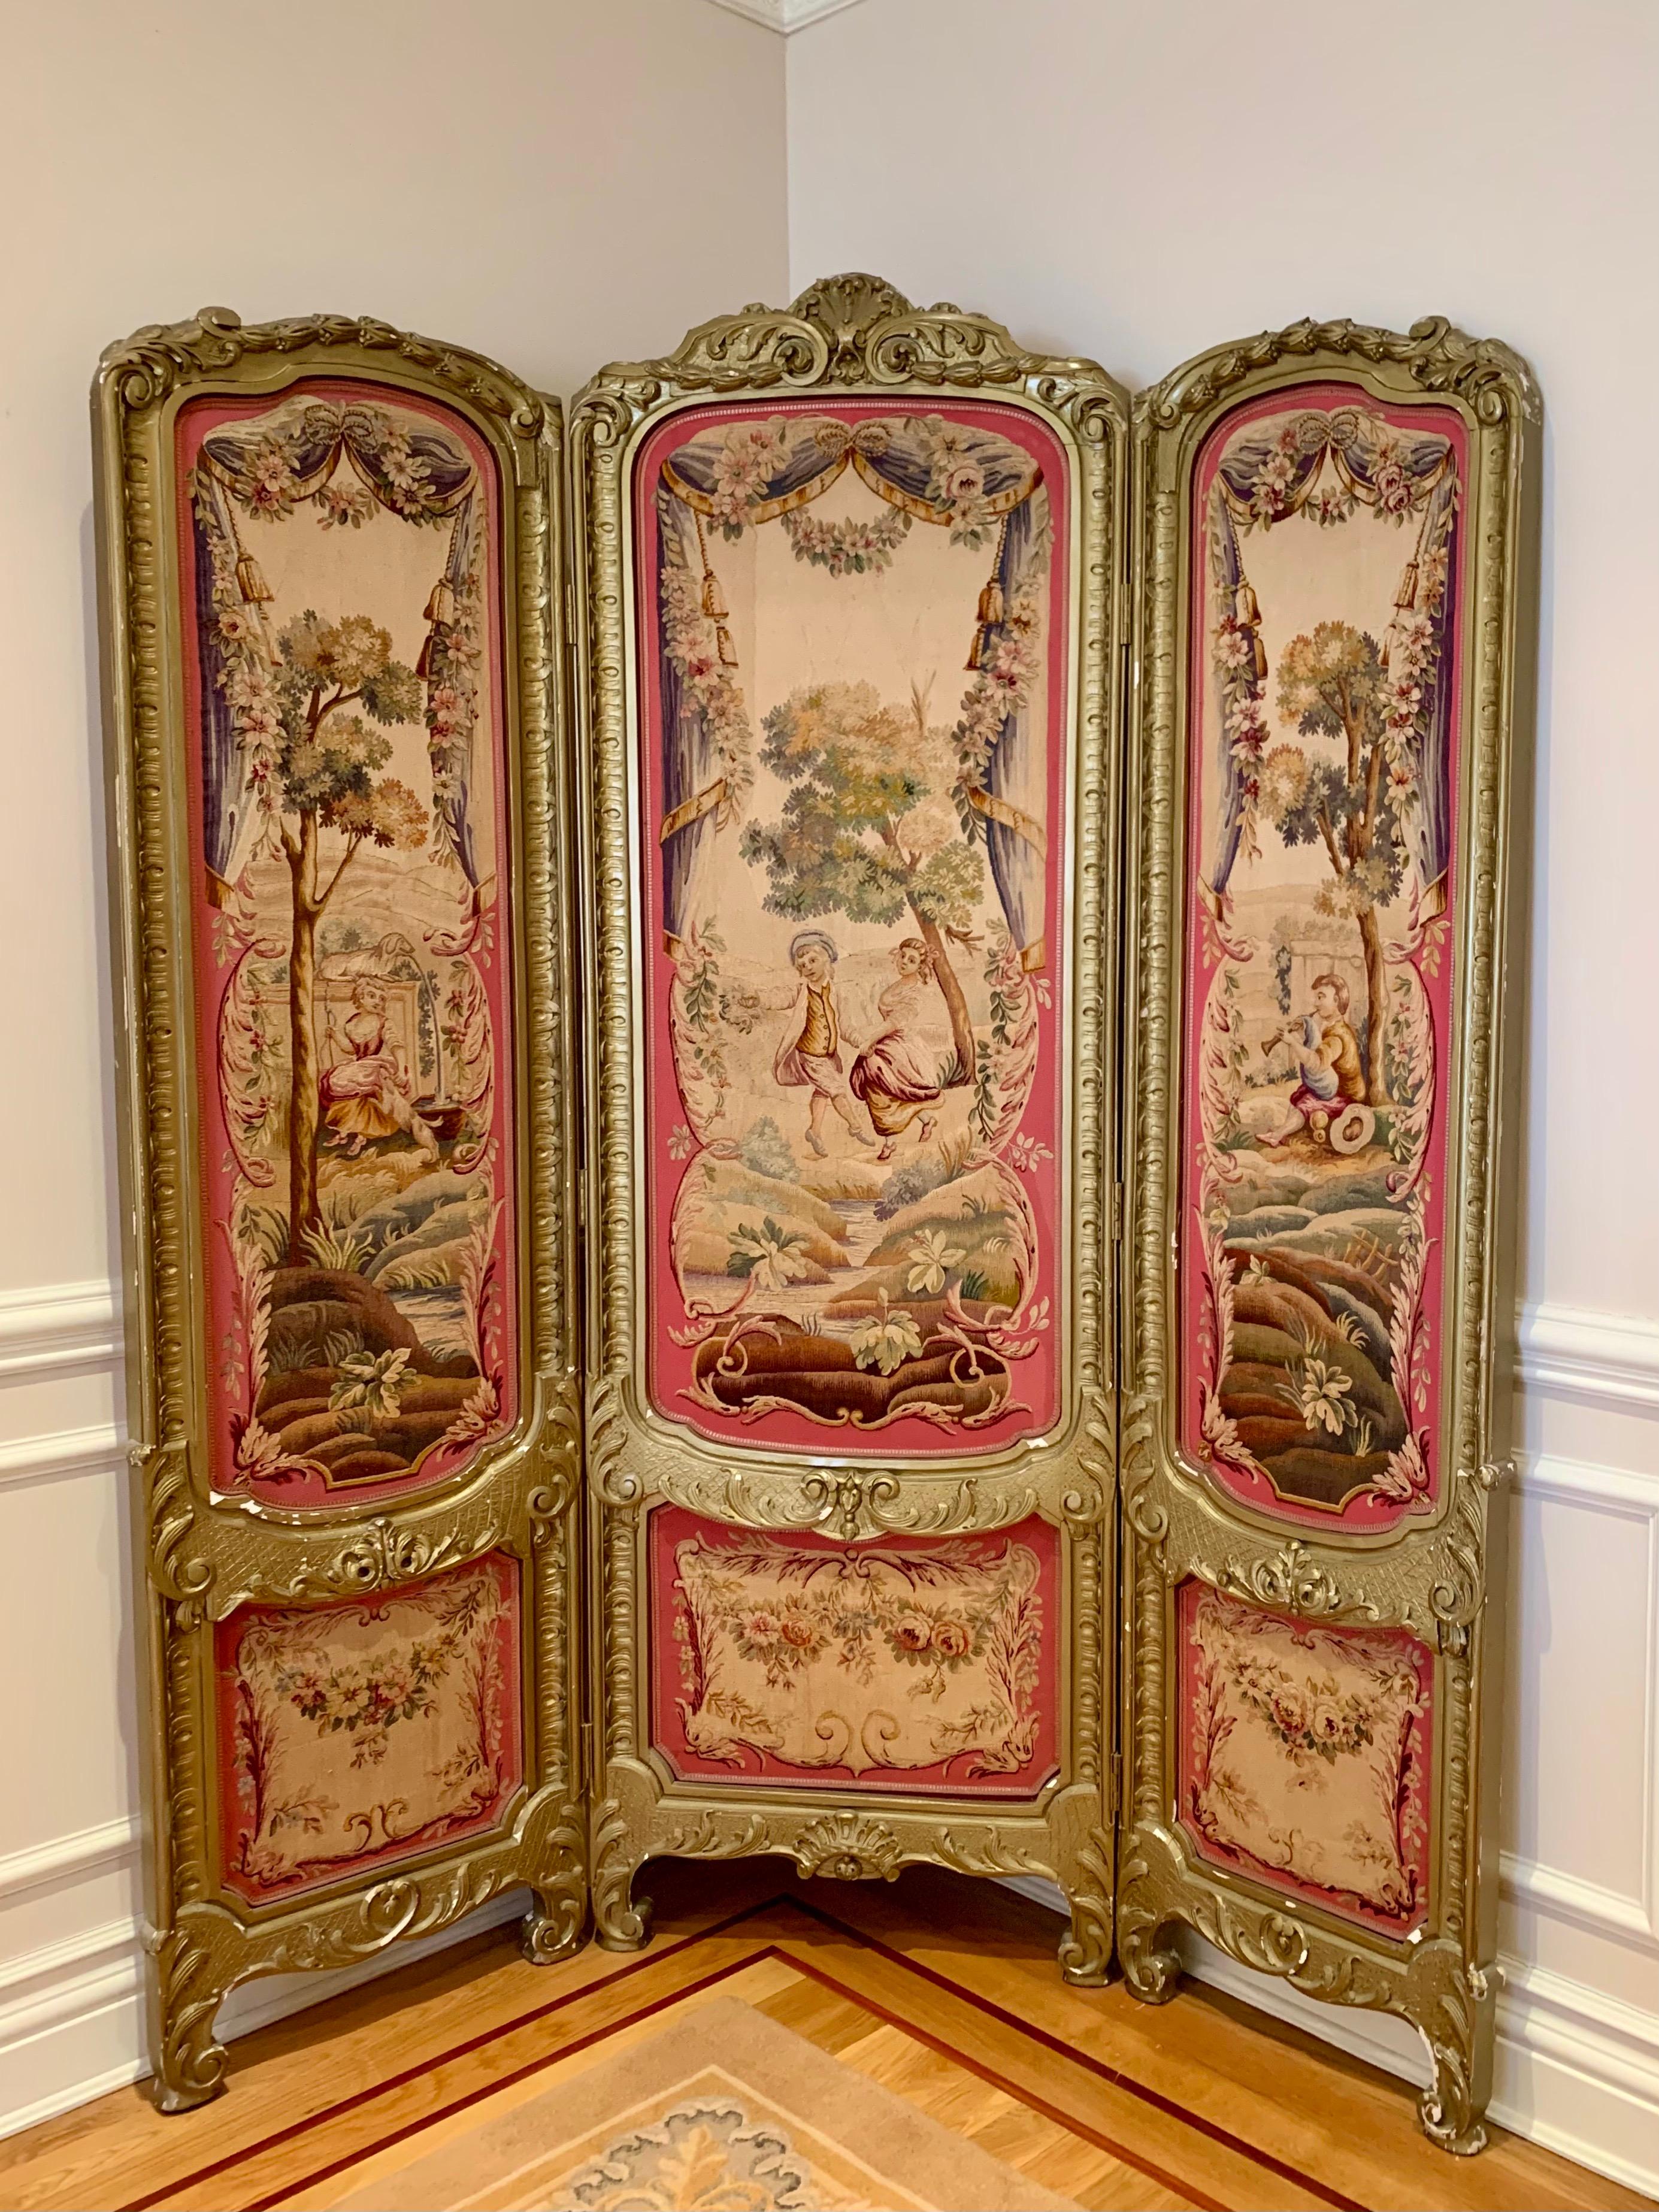 Gorgeous 19th century Louis XV Regency gilded screen and fire screen with Tapestries. The Rococo style tapestries are in pristine condition with very minor loss of gilding to the frames. The larger three panel screen has a pristine pink satin